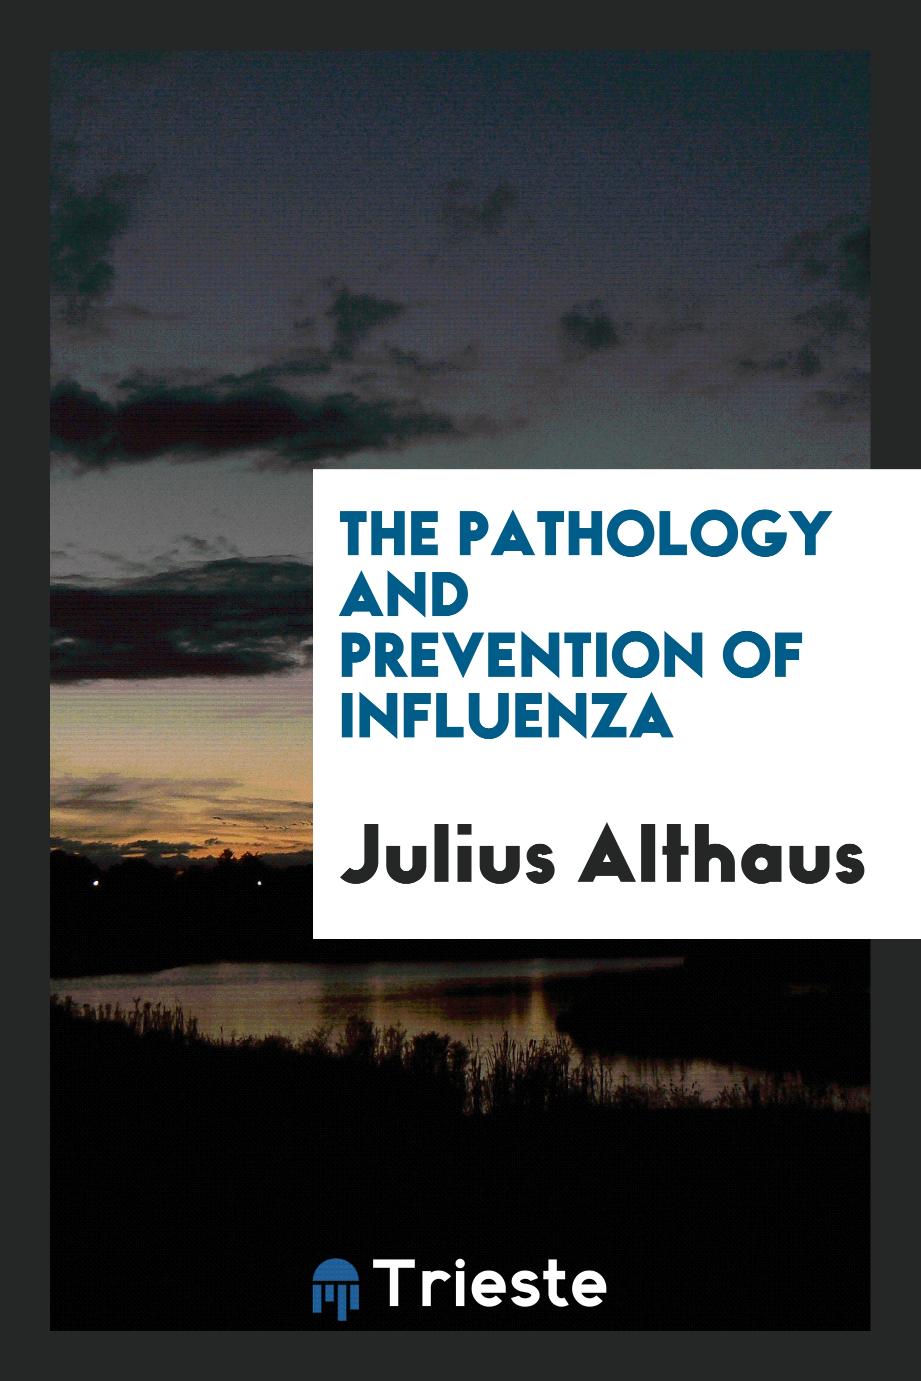 The Pathology and prevention of influenza